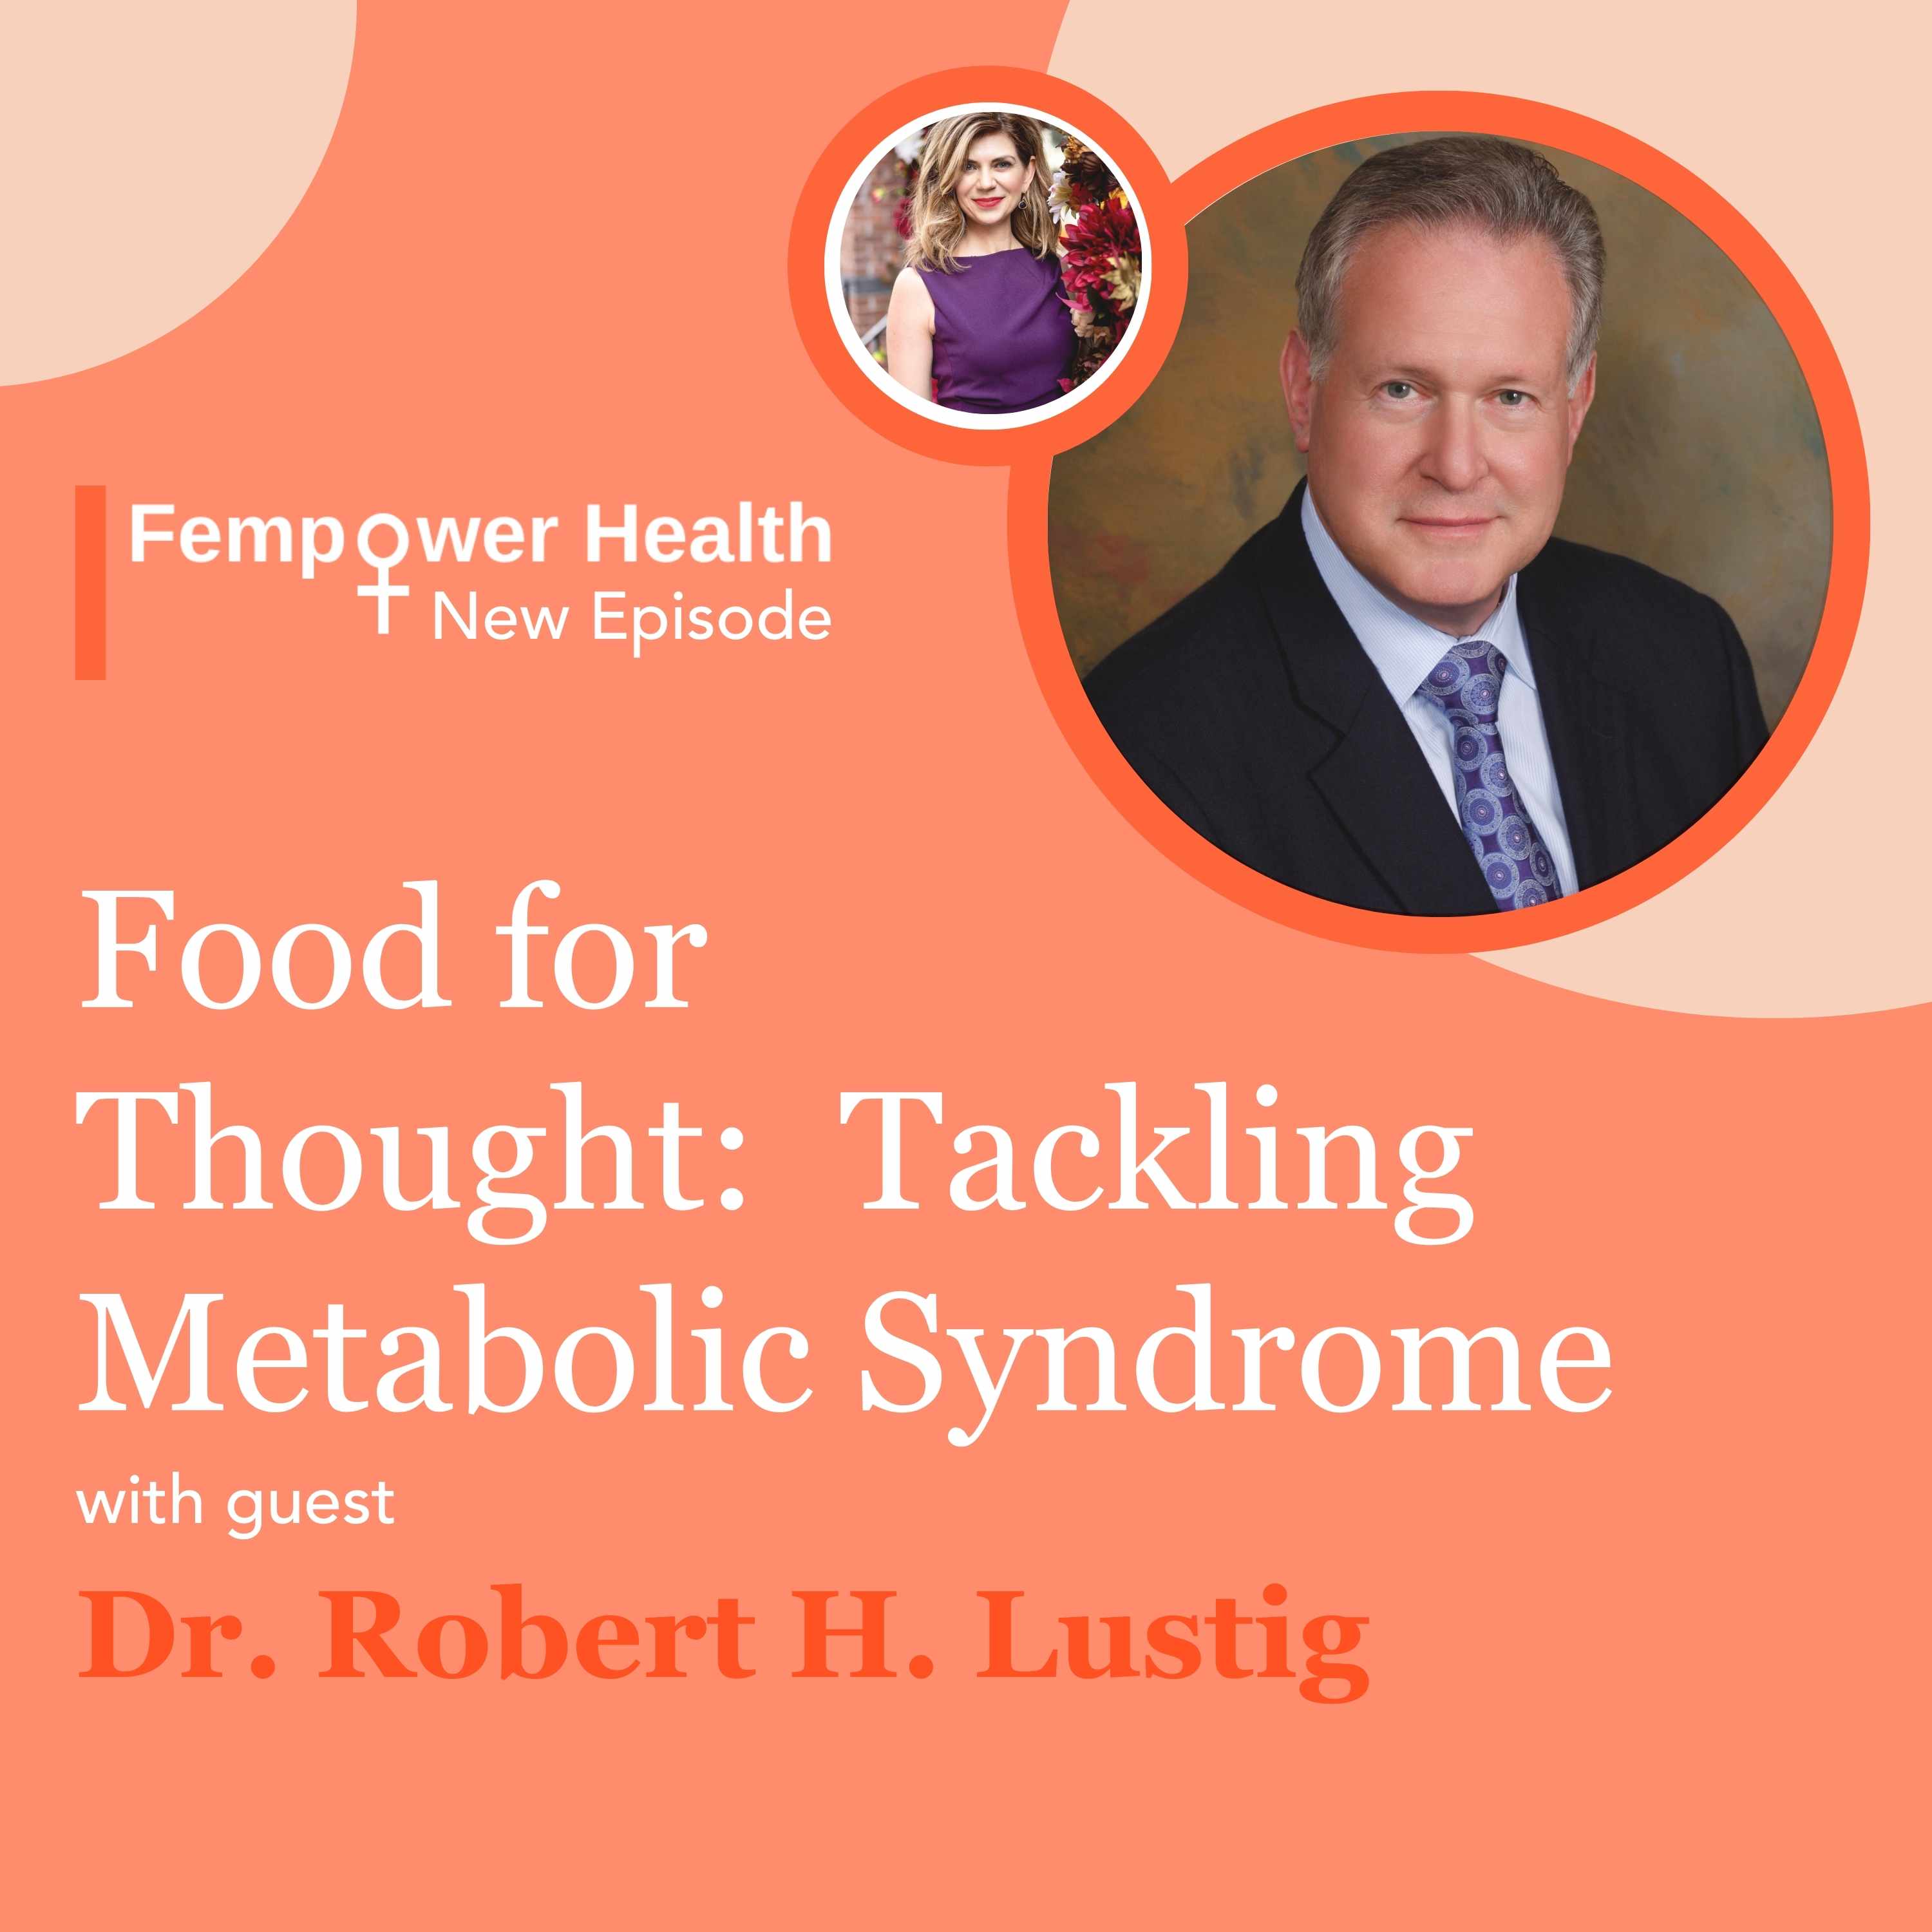 LISTEN AGAIN: Food for  Thought:  Tackling Metabolic Syndrome | Dr. Robert H. Lustig, MD